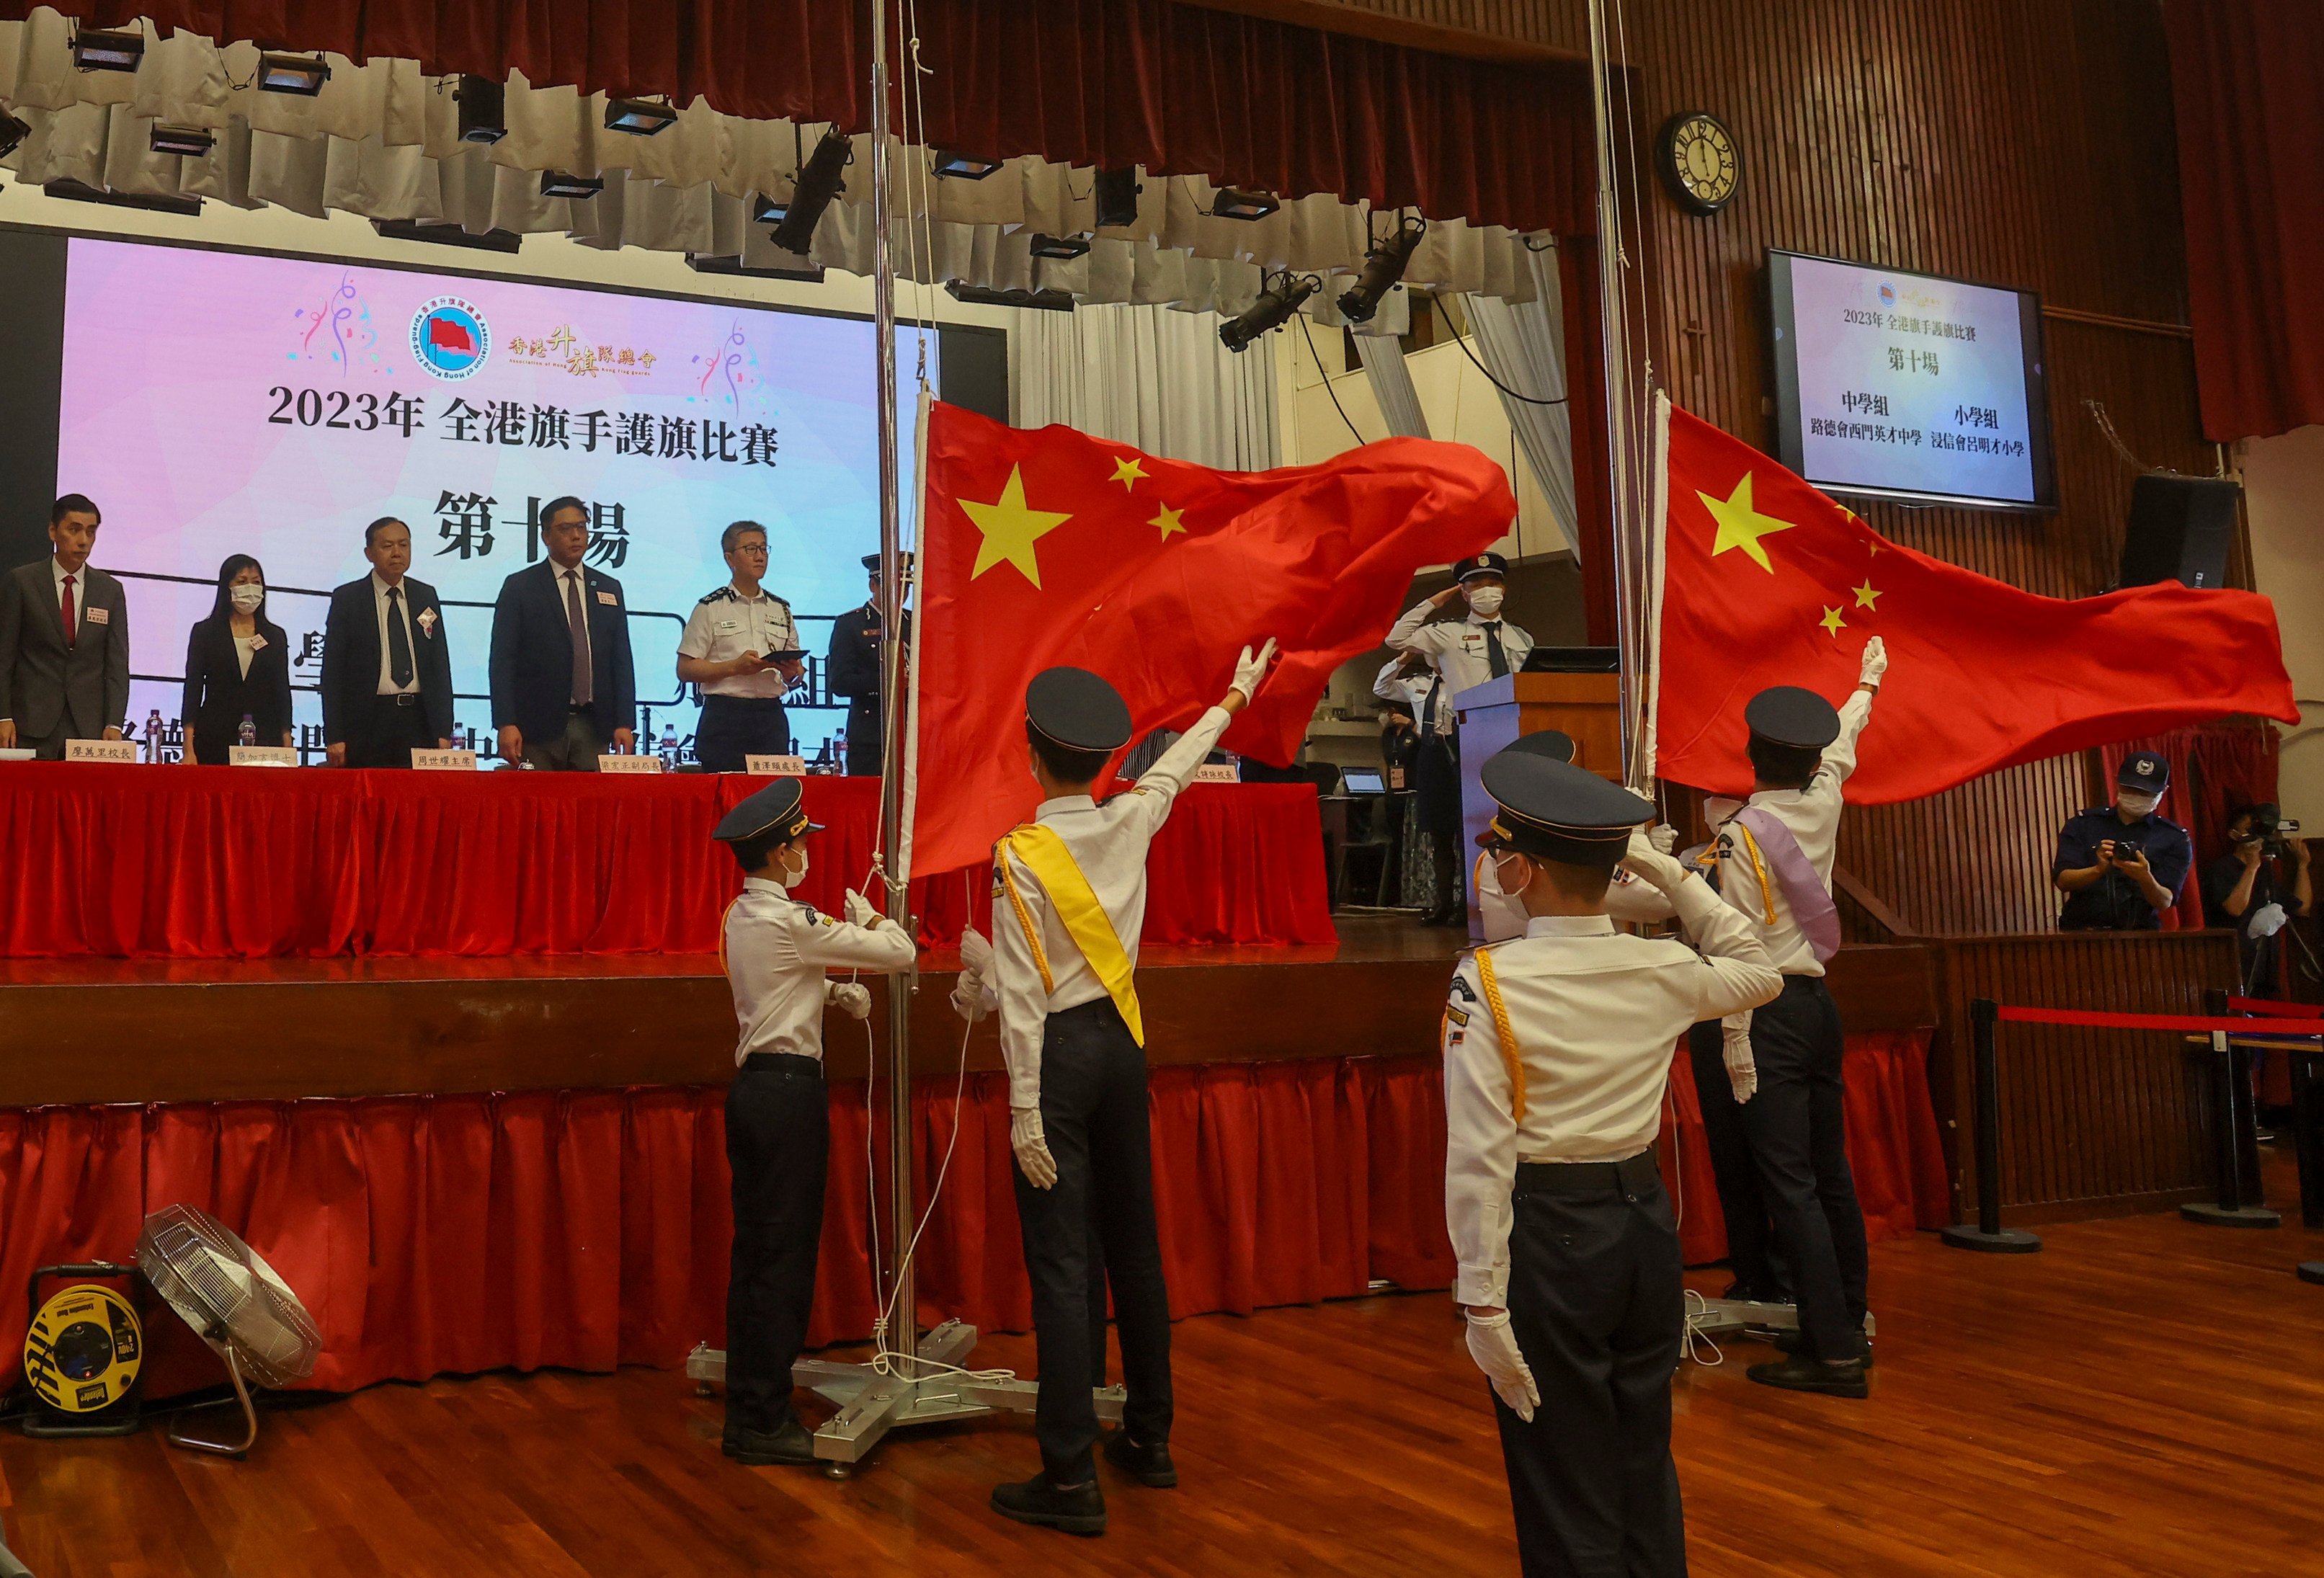 Pupils take part in a flag raising competition. Teachers have been asked to brief pupils on a widened scope of national security concerns outlined by the country. Photo: Jonathan Wong